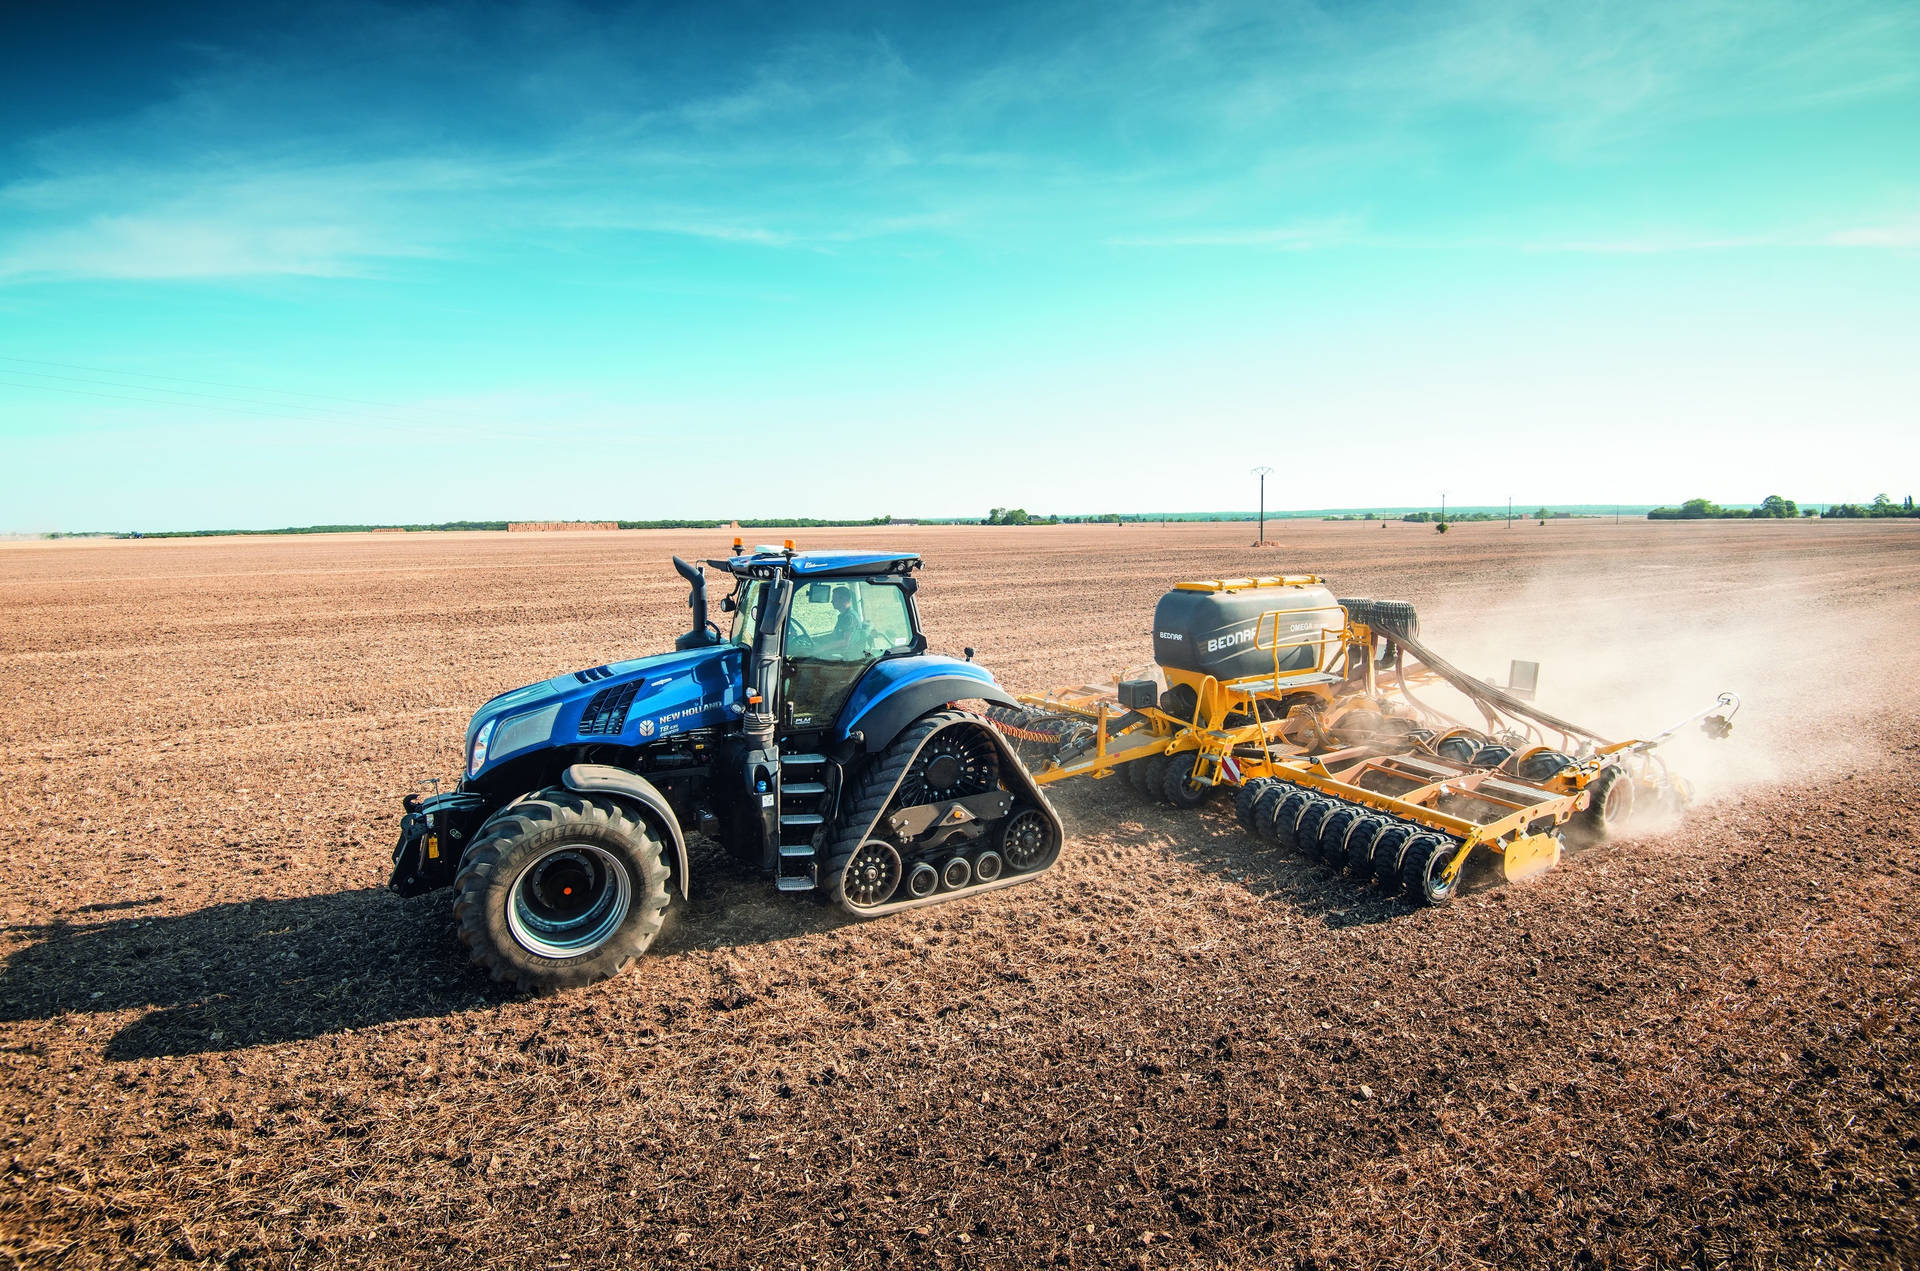 New Holland Tractor Wallpapers